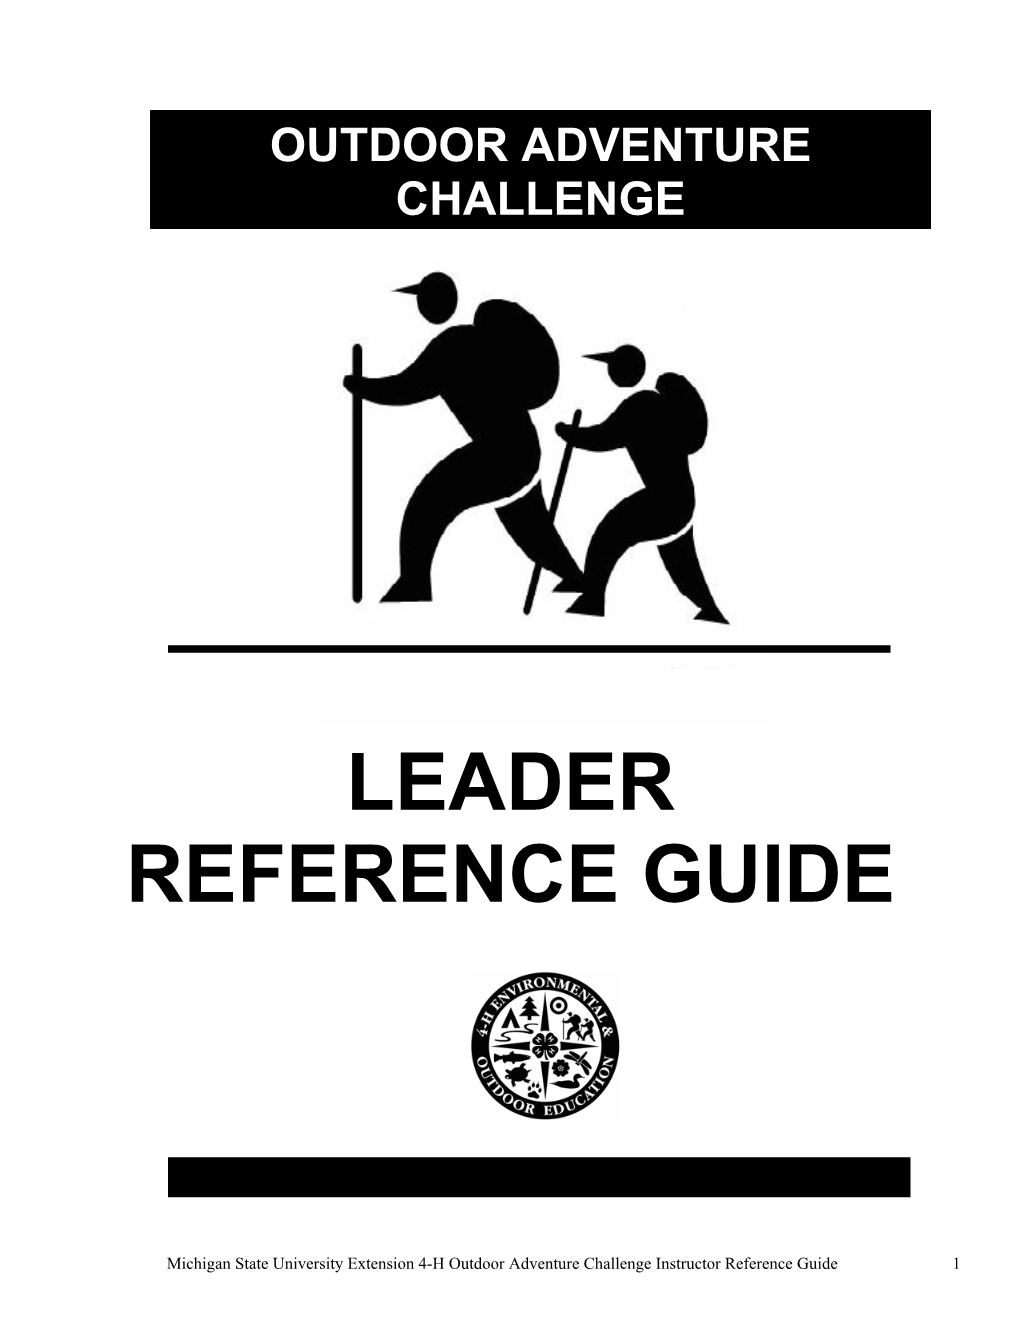 4-H Outdoor Adventure Challenge Instructor Reference Guide 1 Leader Reference Guide Contents